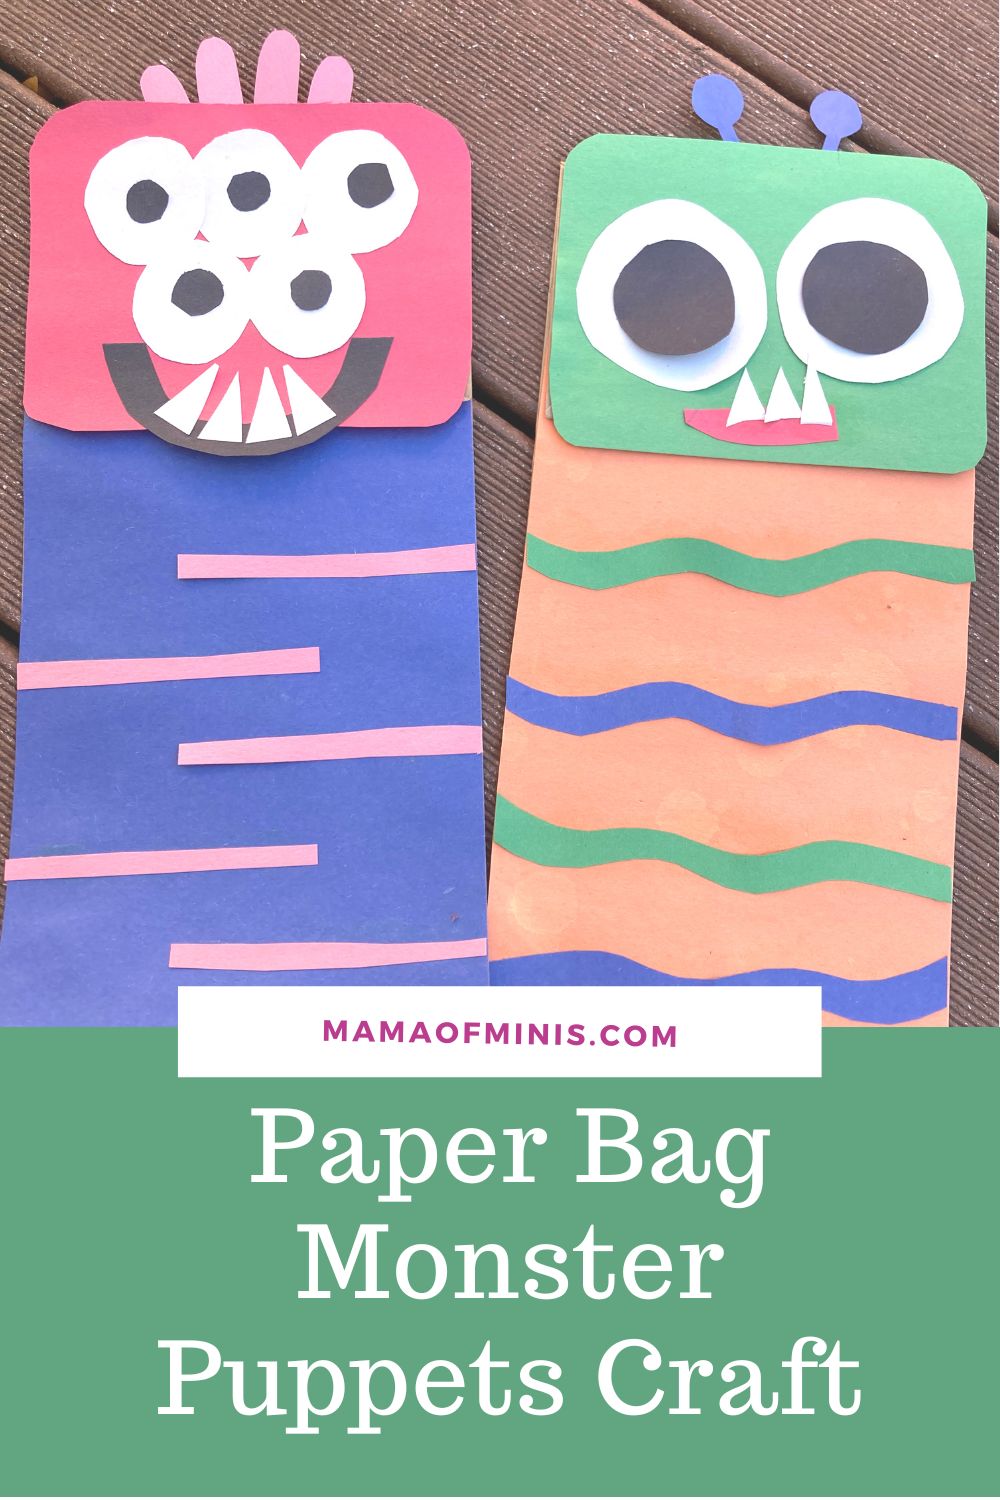 Paper Bag Monster Puppets Craft Pin